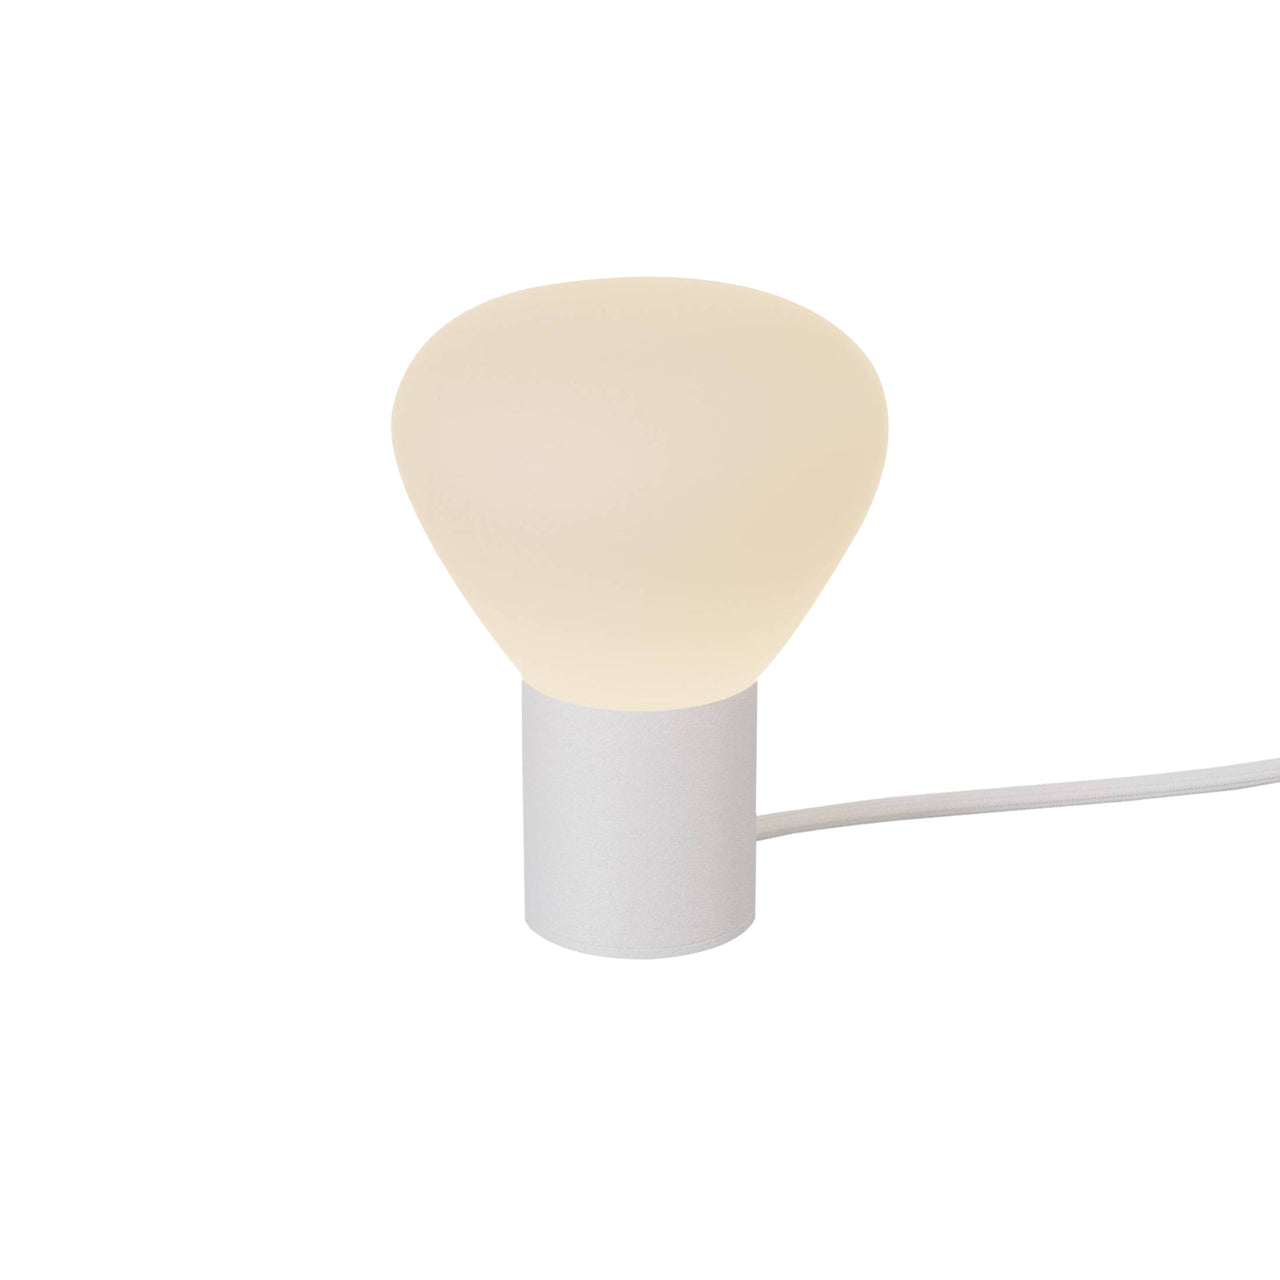 Parc 01 Table Lamp: Footswitch + White + White